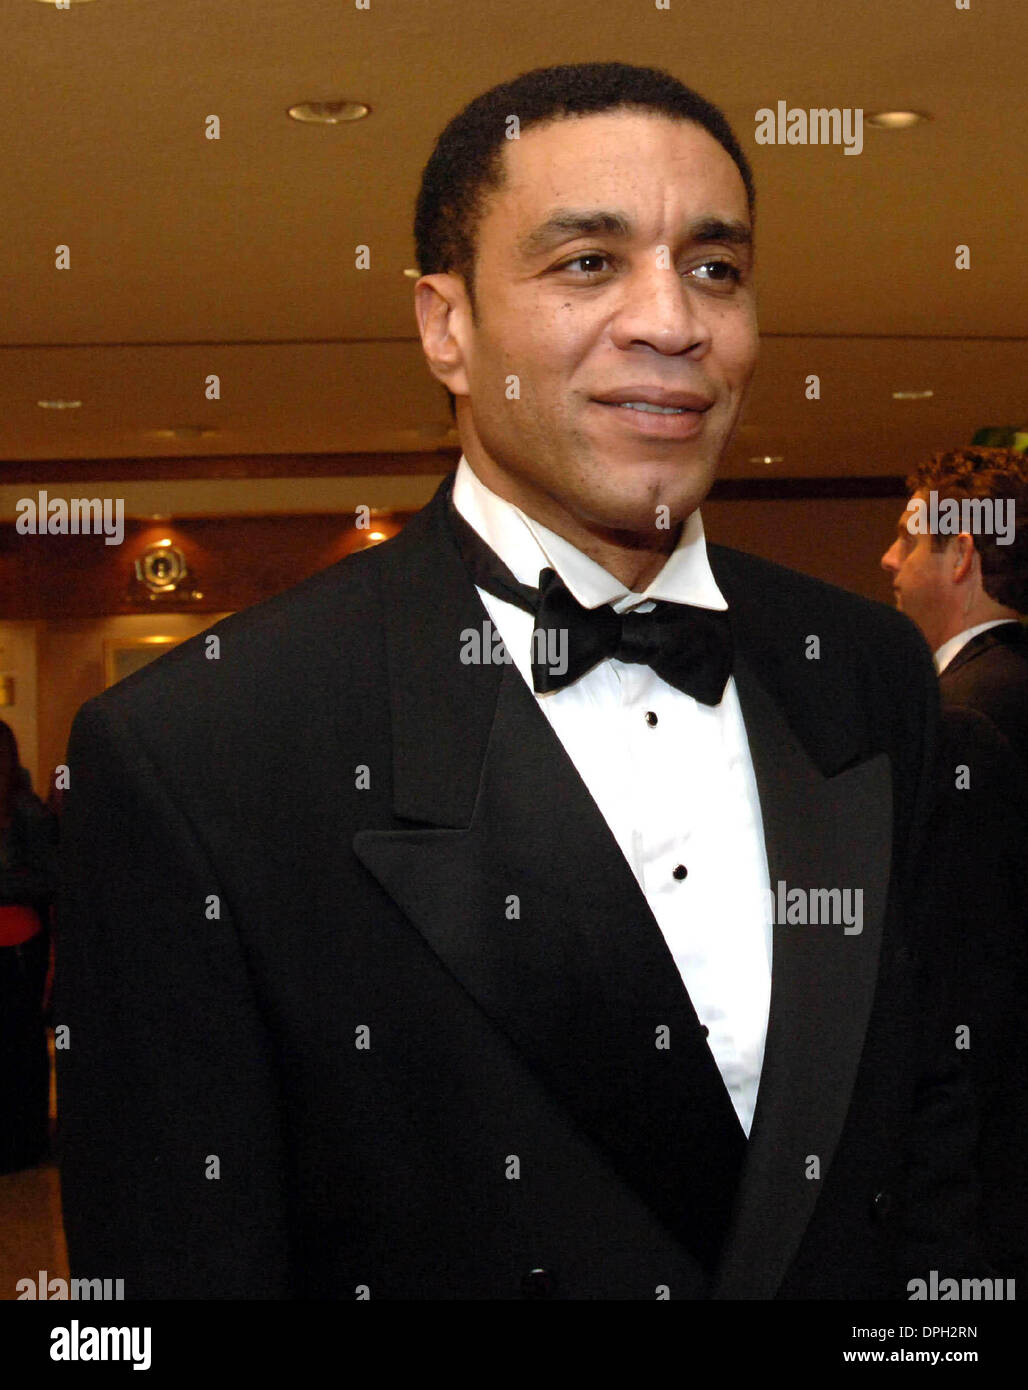 Apr. 29, 2006 - Washington, District of Columbia, U.S. - The White House Correspondents Dinner- guests arriving on the red carpet include actor Harry Lennix of tv show commander and chief .I10688CB.(Credit Image: © Christy Bowe/Globe Photos/ZUMAPRESS.com) Stock Photo